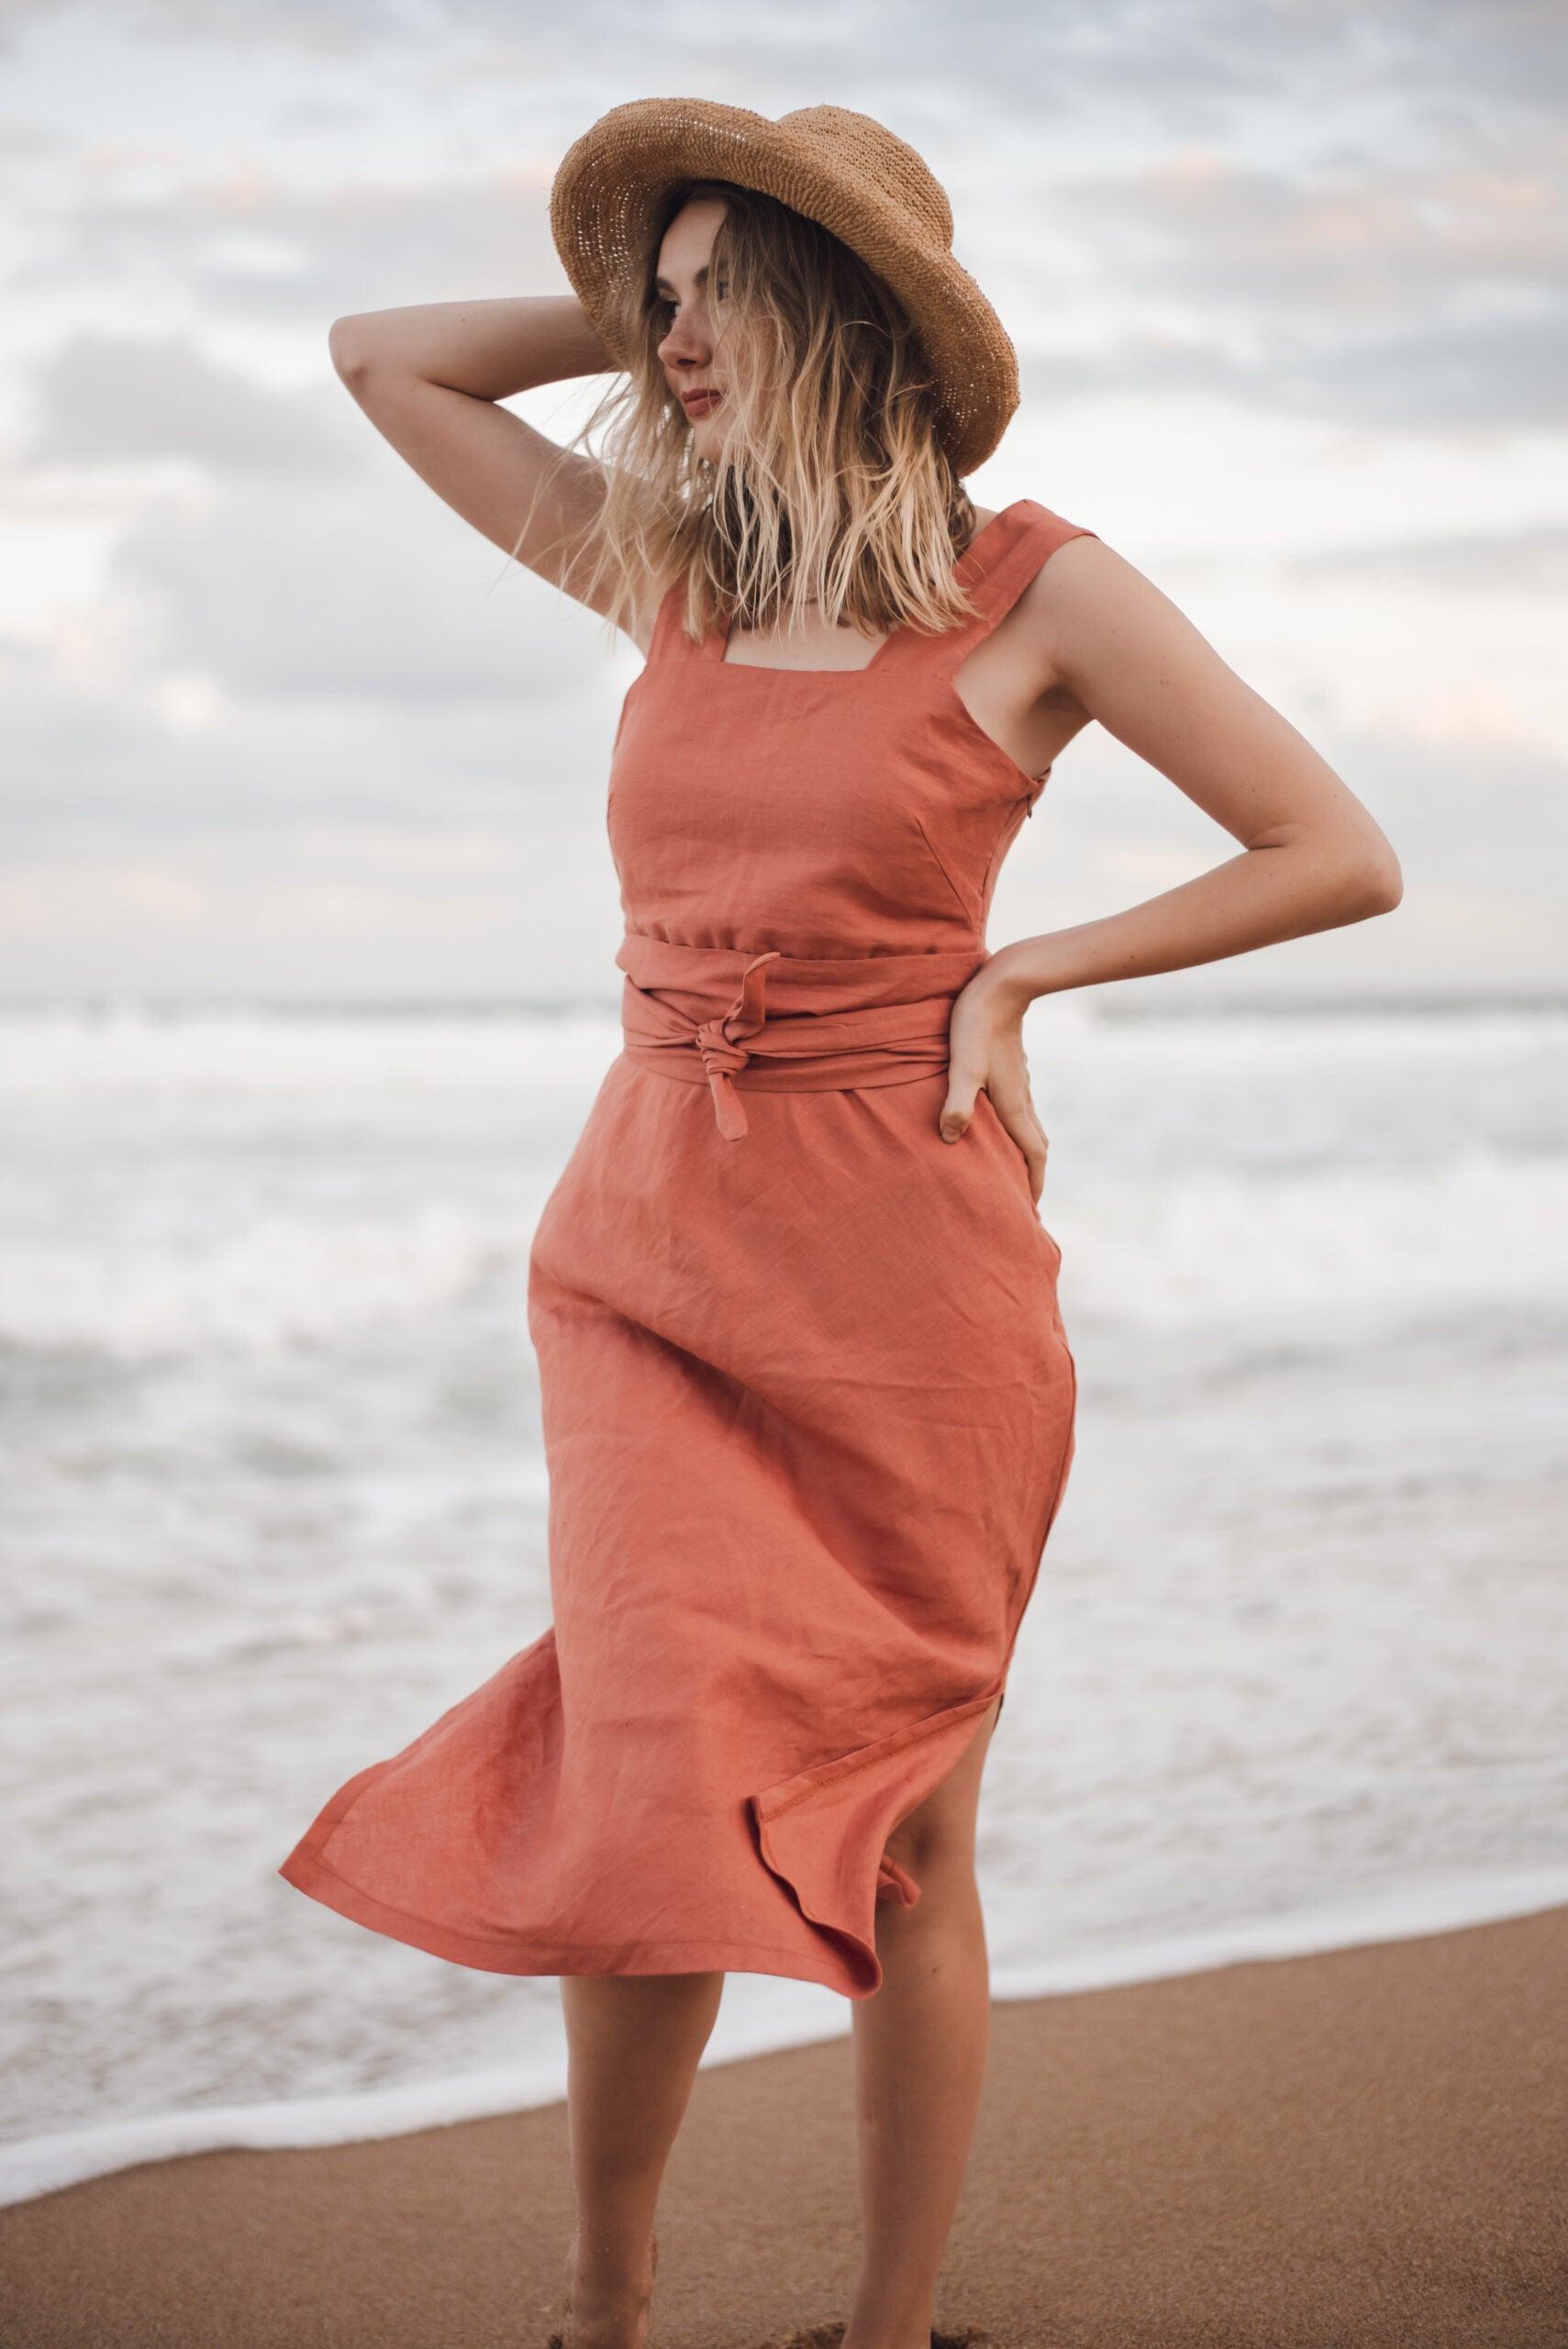 On the sun-kissed beach, a woman captivates with her allure, donning a striking peach dress and a chic hat. The impeccable attire, meticulously tailored by a distinguished Linen clothing designer and manufacturer based in South Africa, showcases the epitome of luxury and style.